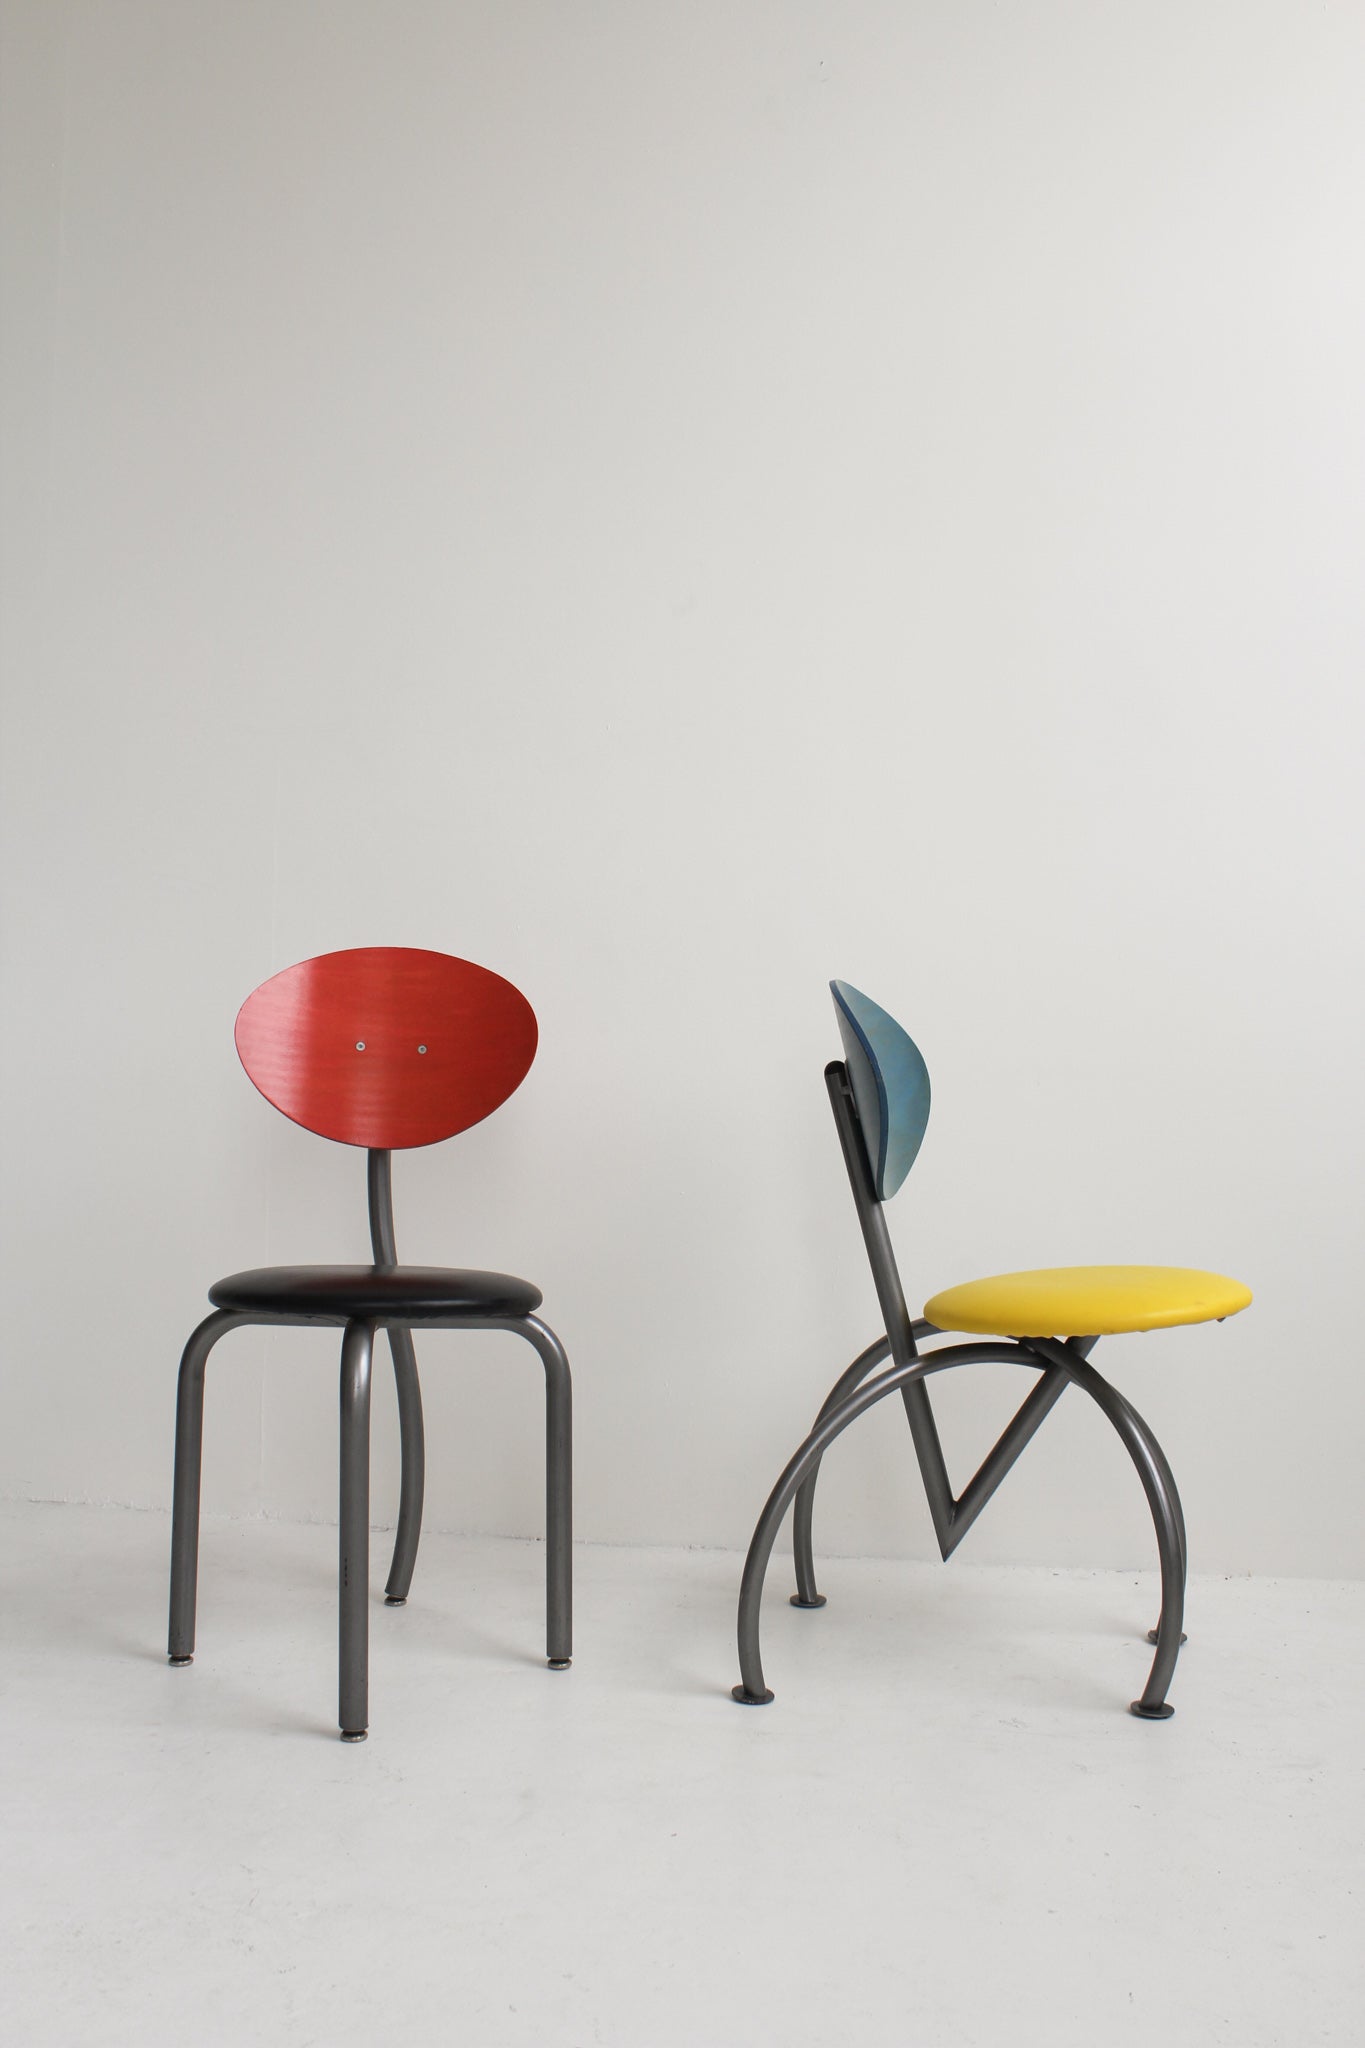 Color Block Memphis Style Chairs